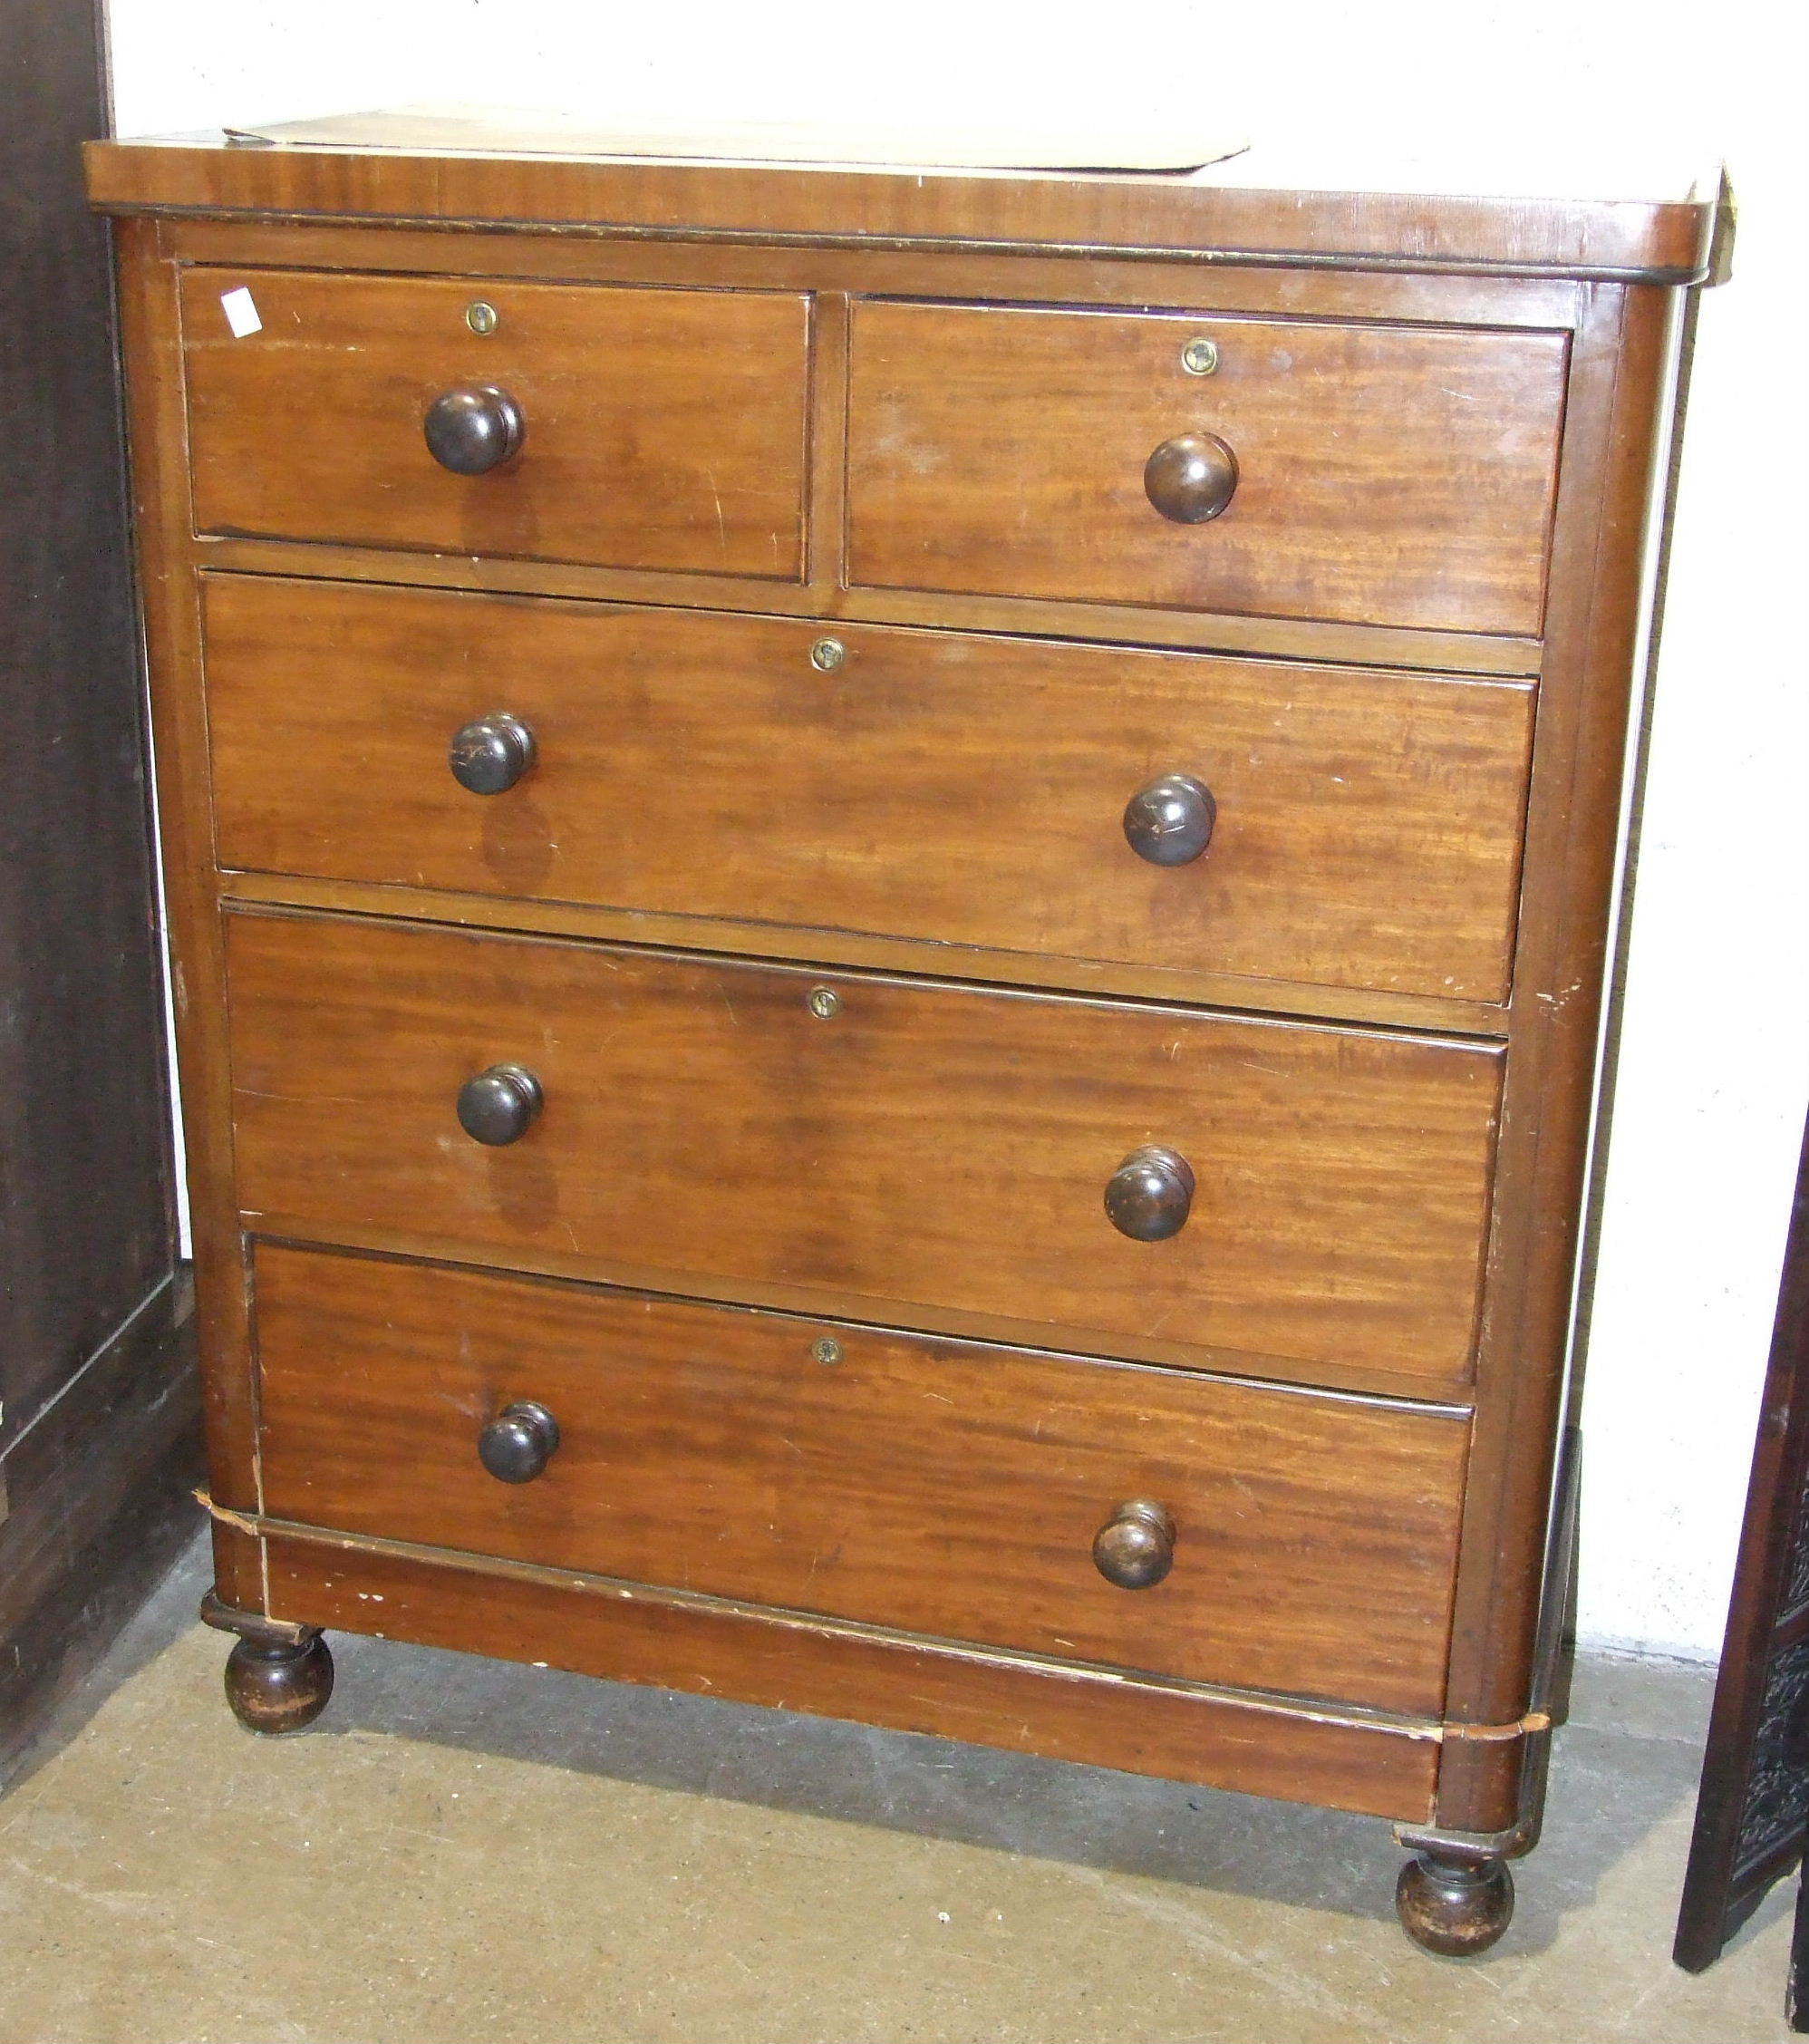 A late-19th century mahogany finish rectangular chest of two short and three long drawers, on turned